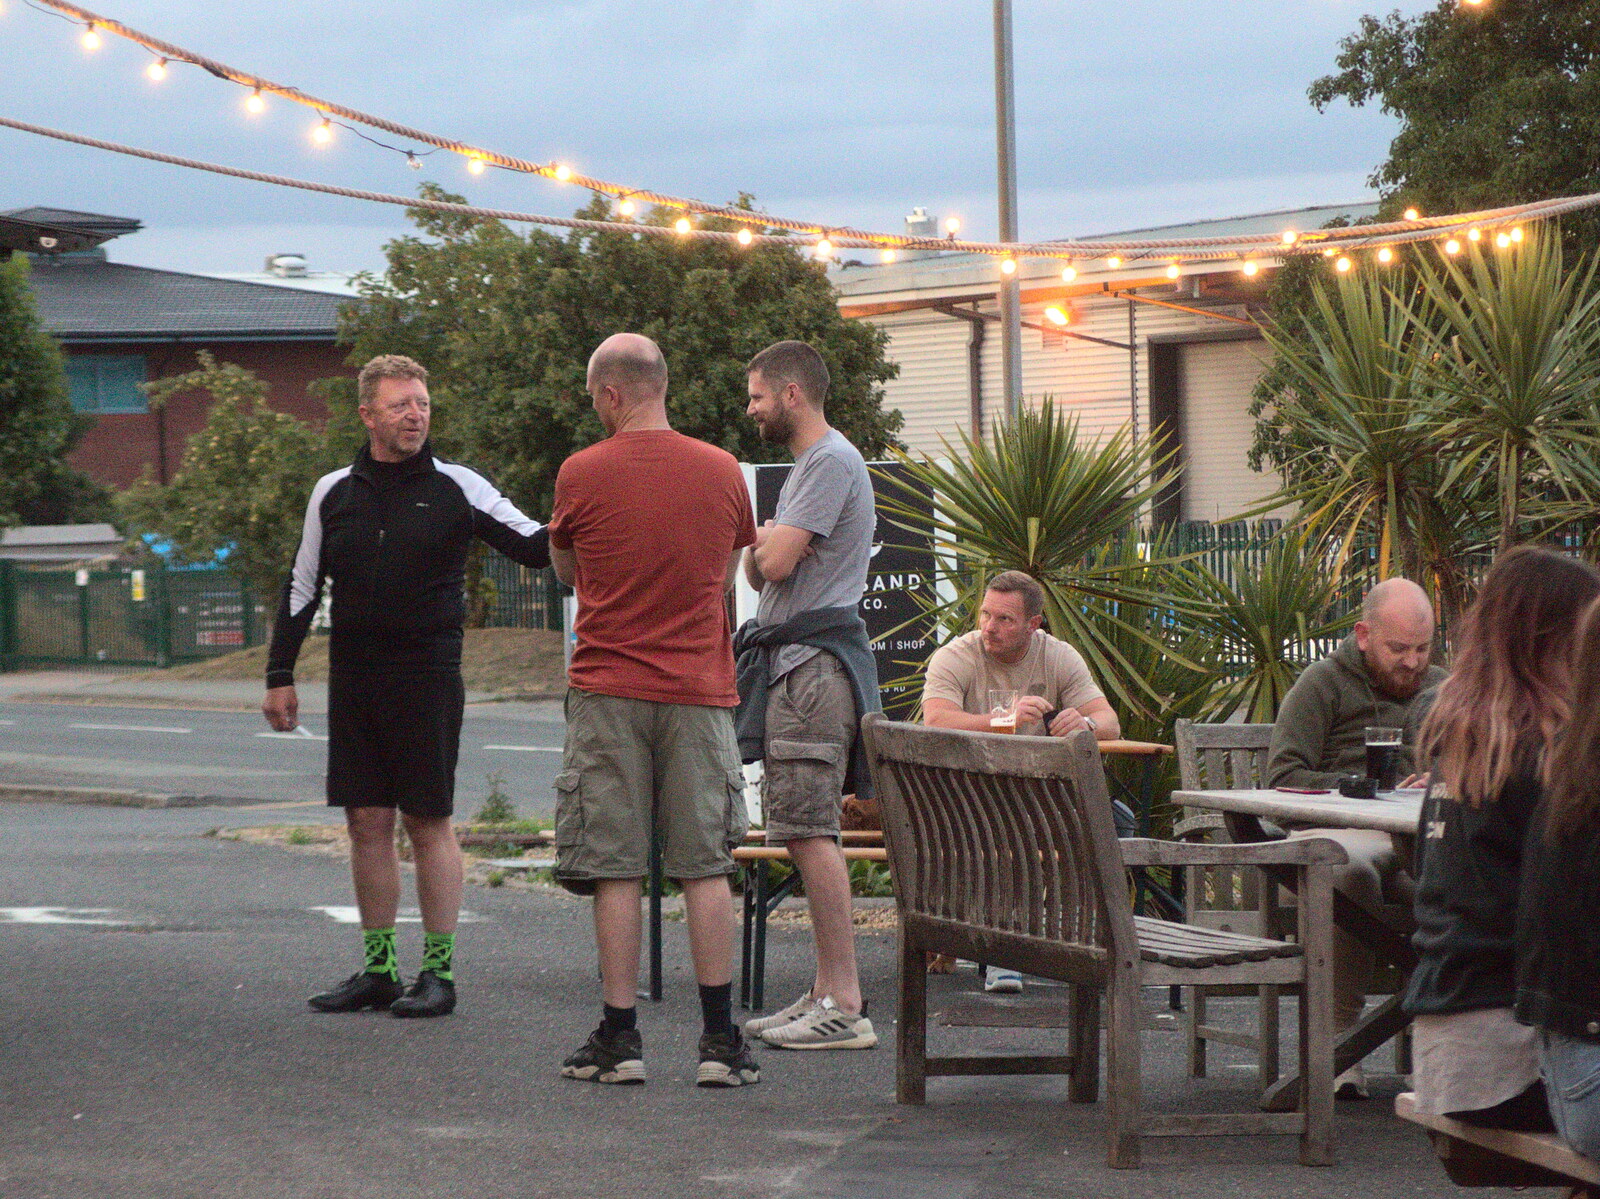 The lads chat in the 'beer garden' from The BSCC at The Crown, Dickleburgh, Norfolk - 19th August 2021